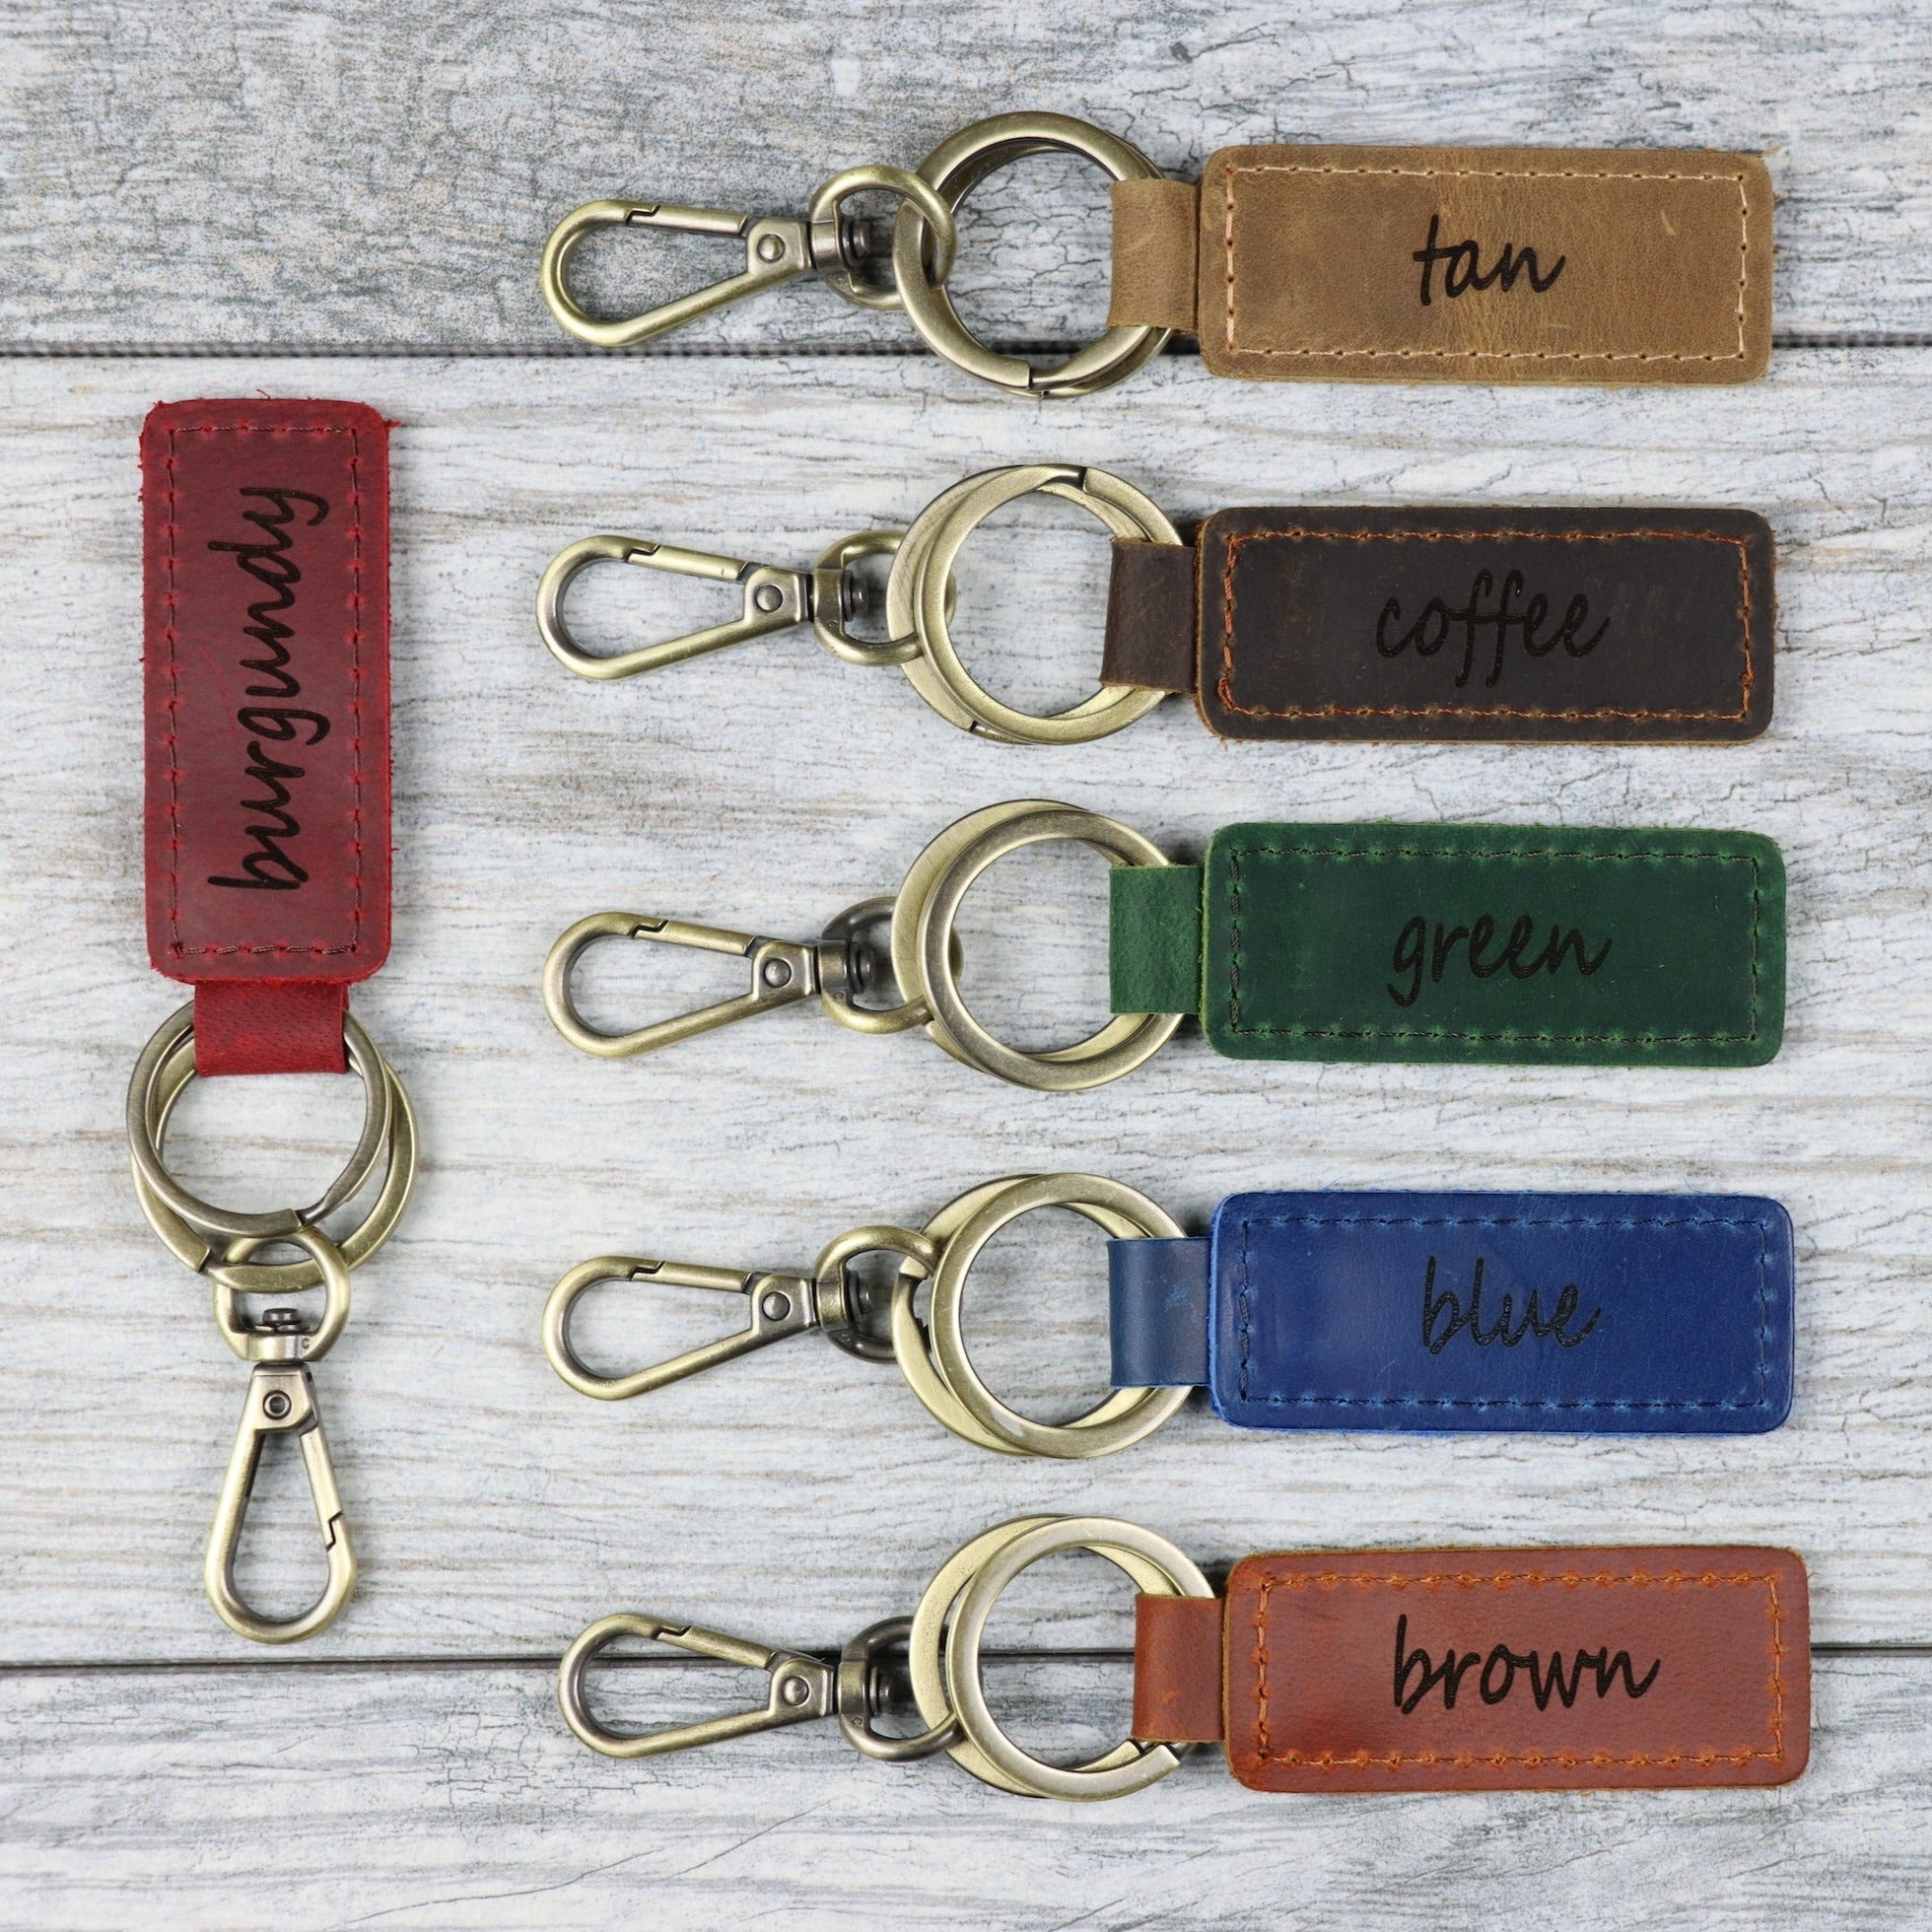 LucasGift 15-CUSTOMIZED Blank Leather Keychains Wholesale - Keychains in Bulk Burgundy / Pack of 15-CUSTOMIZED